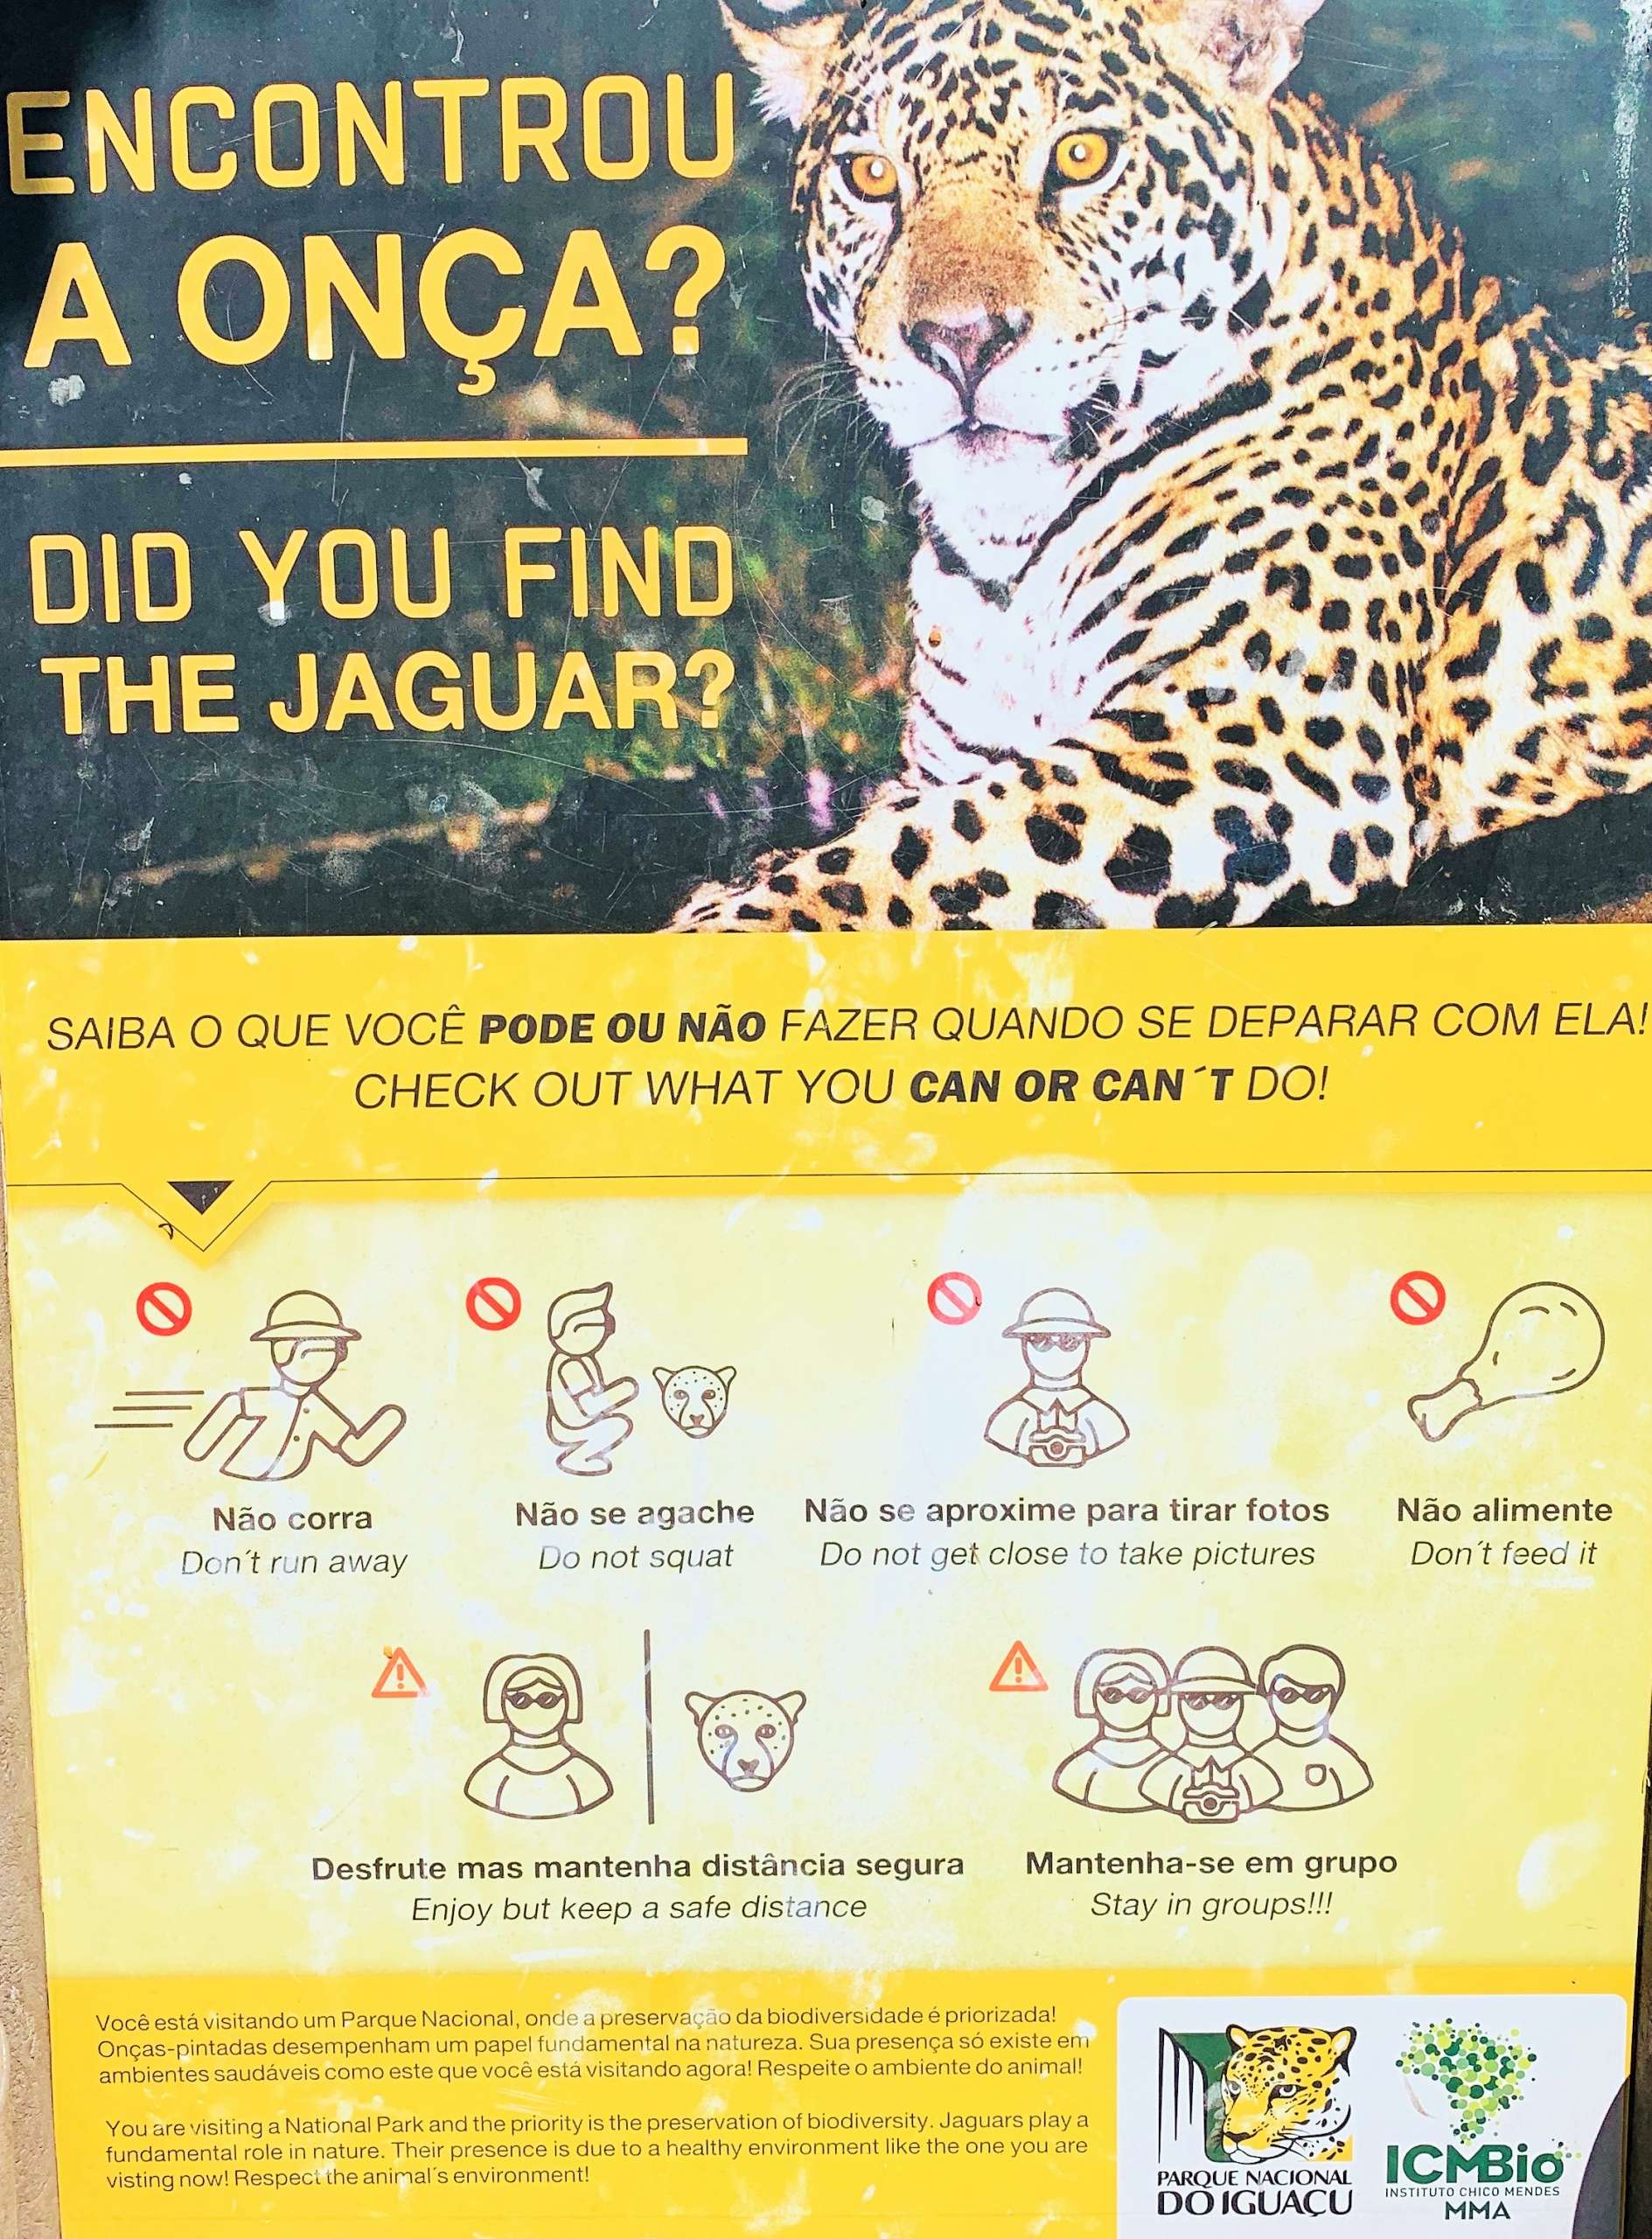 Warning about Jaguars in the National park in Iguassu